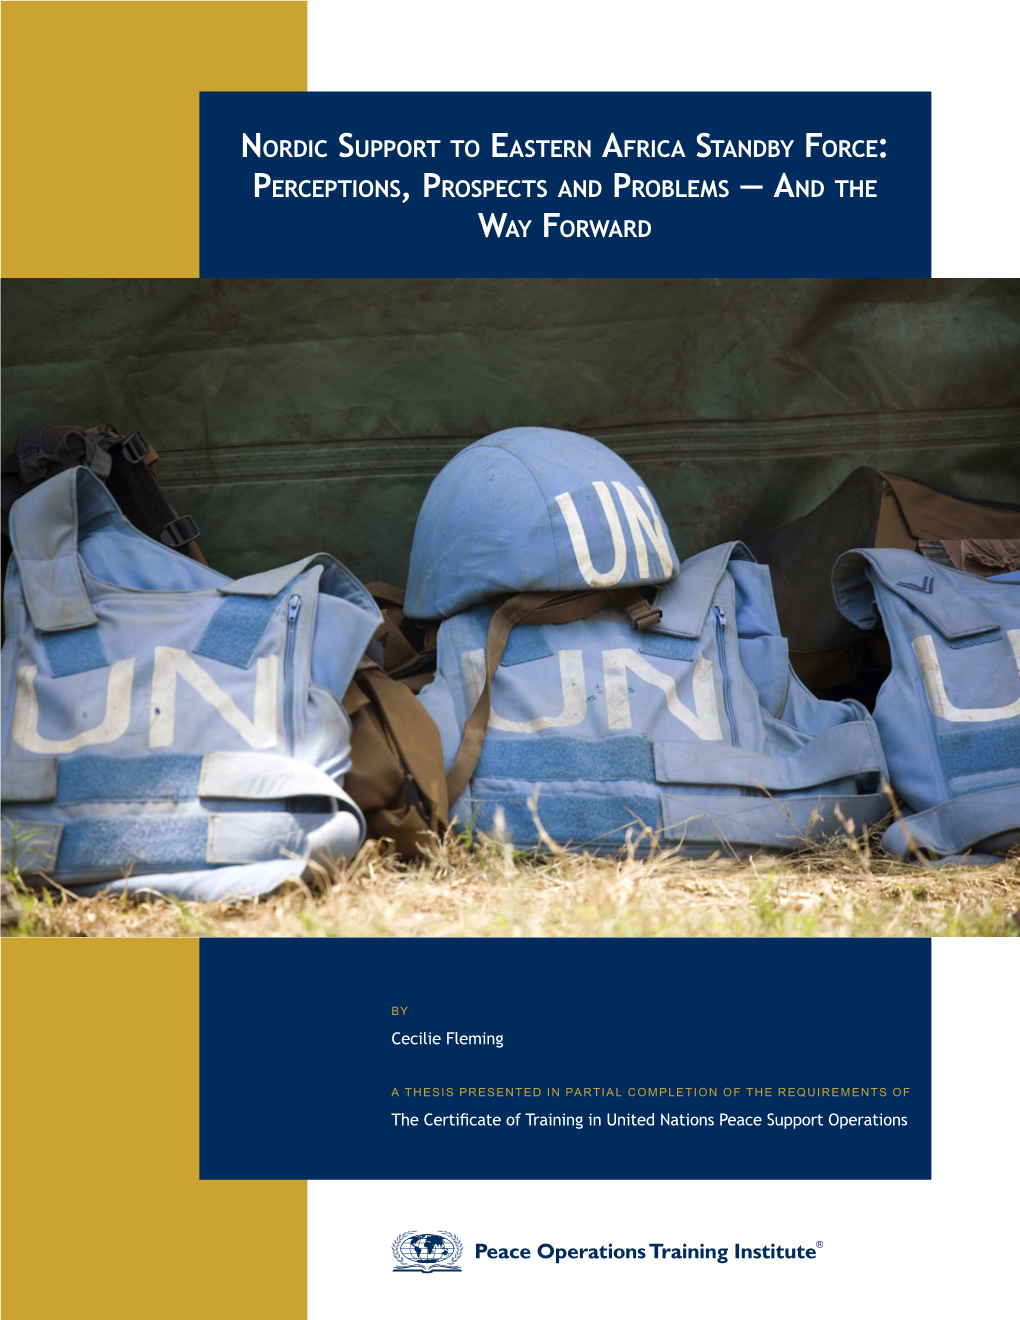 Nordic Support to Eastern Africa Standby Force: Perceptions, Prospects and Problems — and the Way Forward